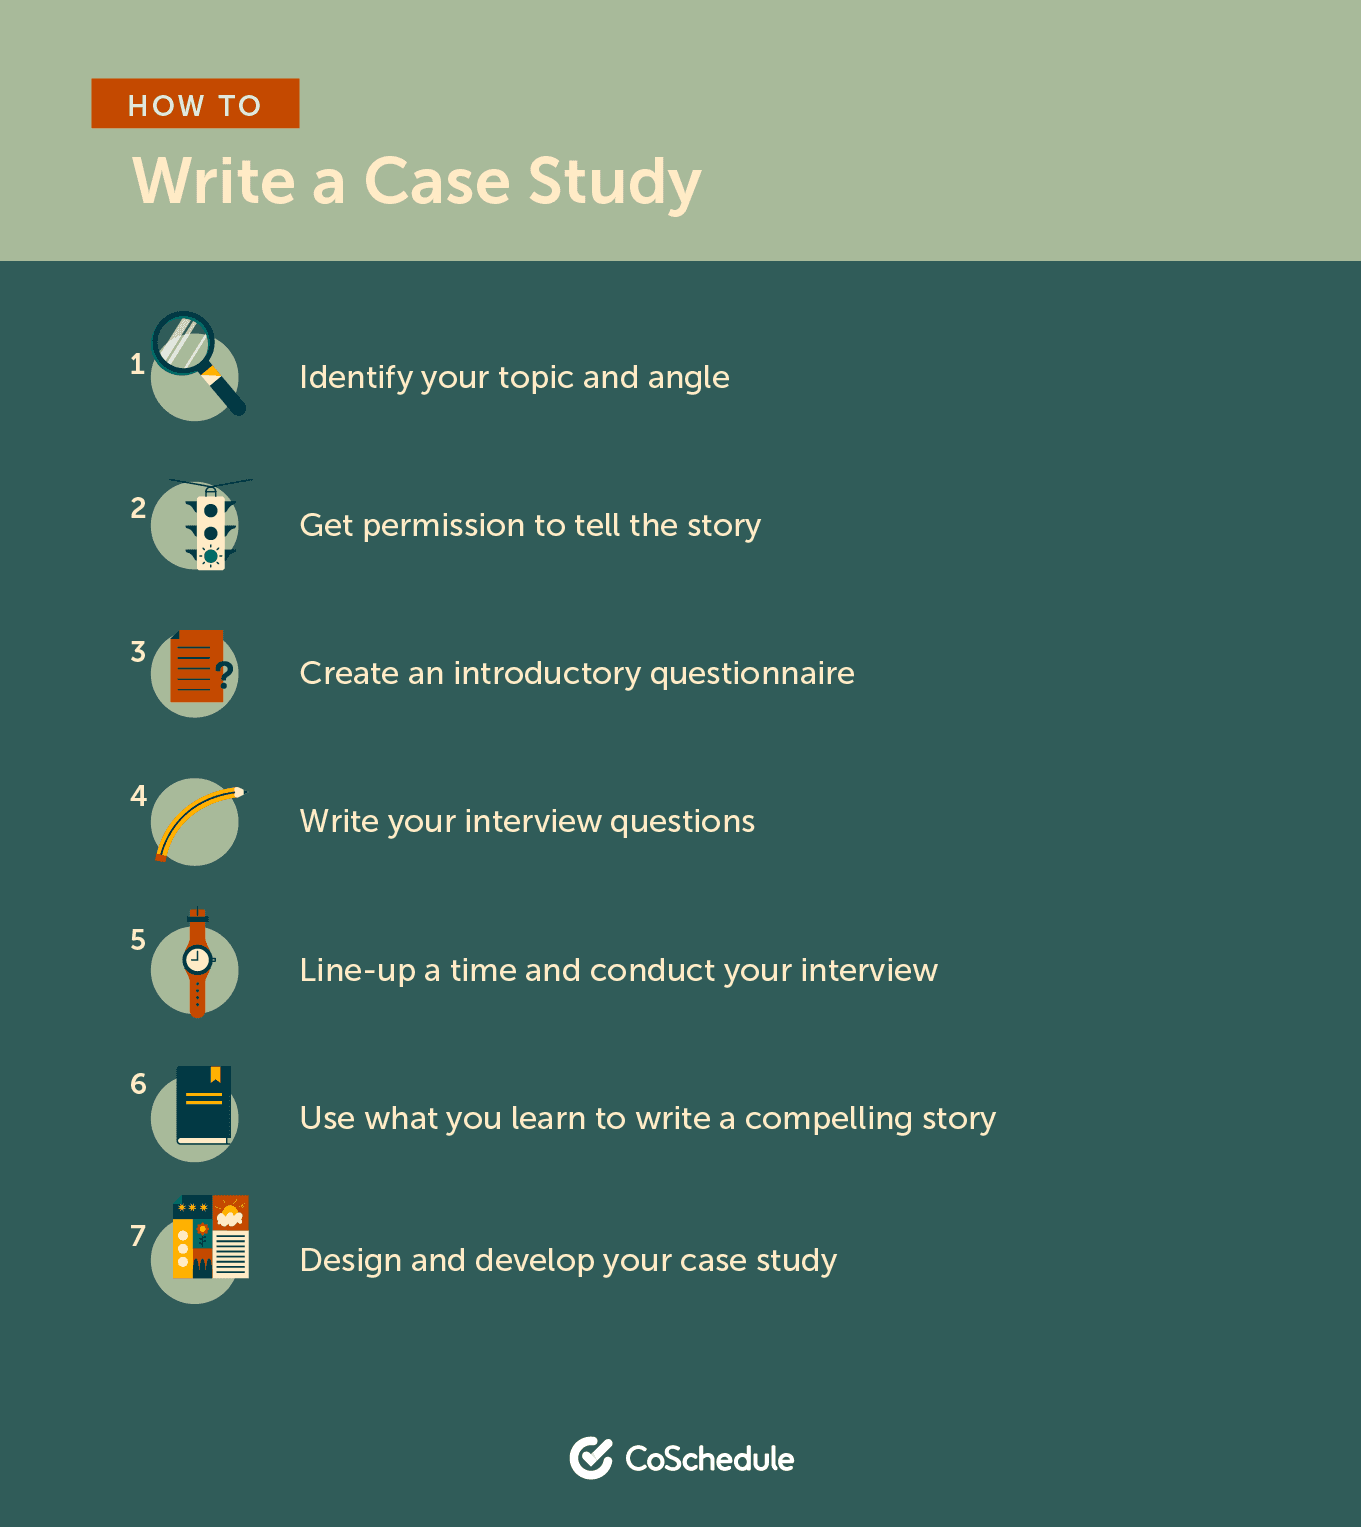 List of 7 steps on how to write a case study.